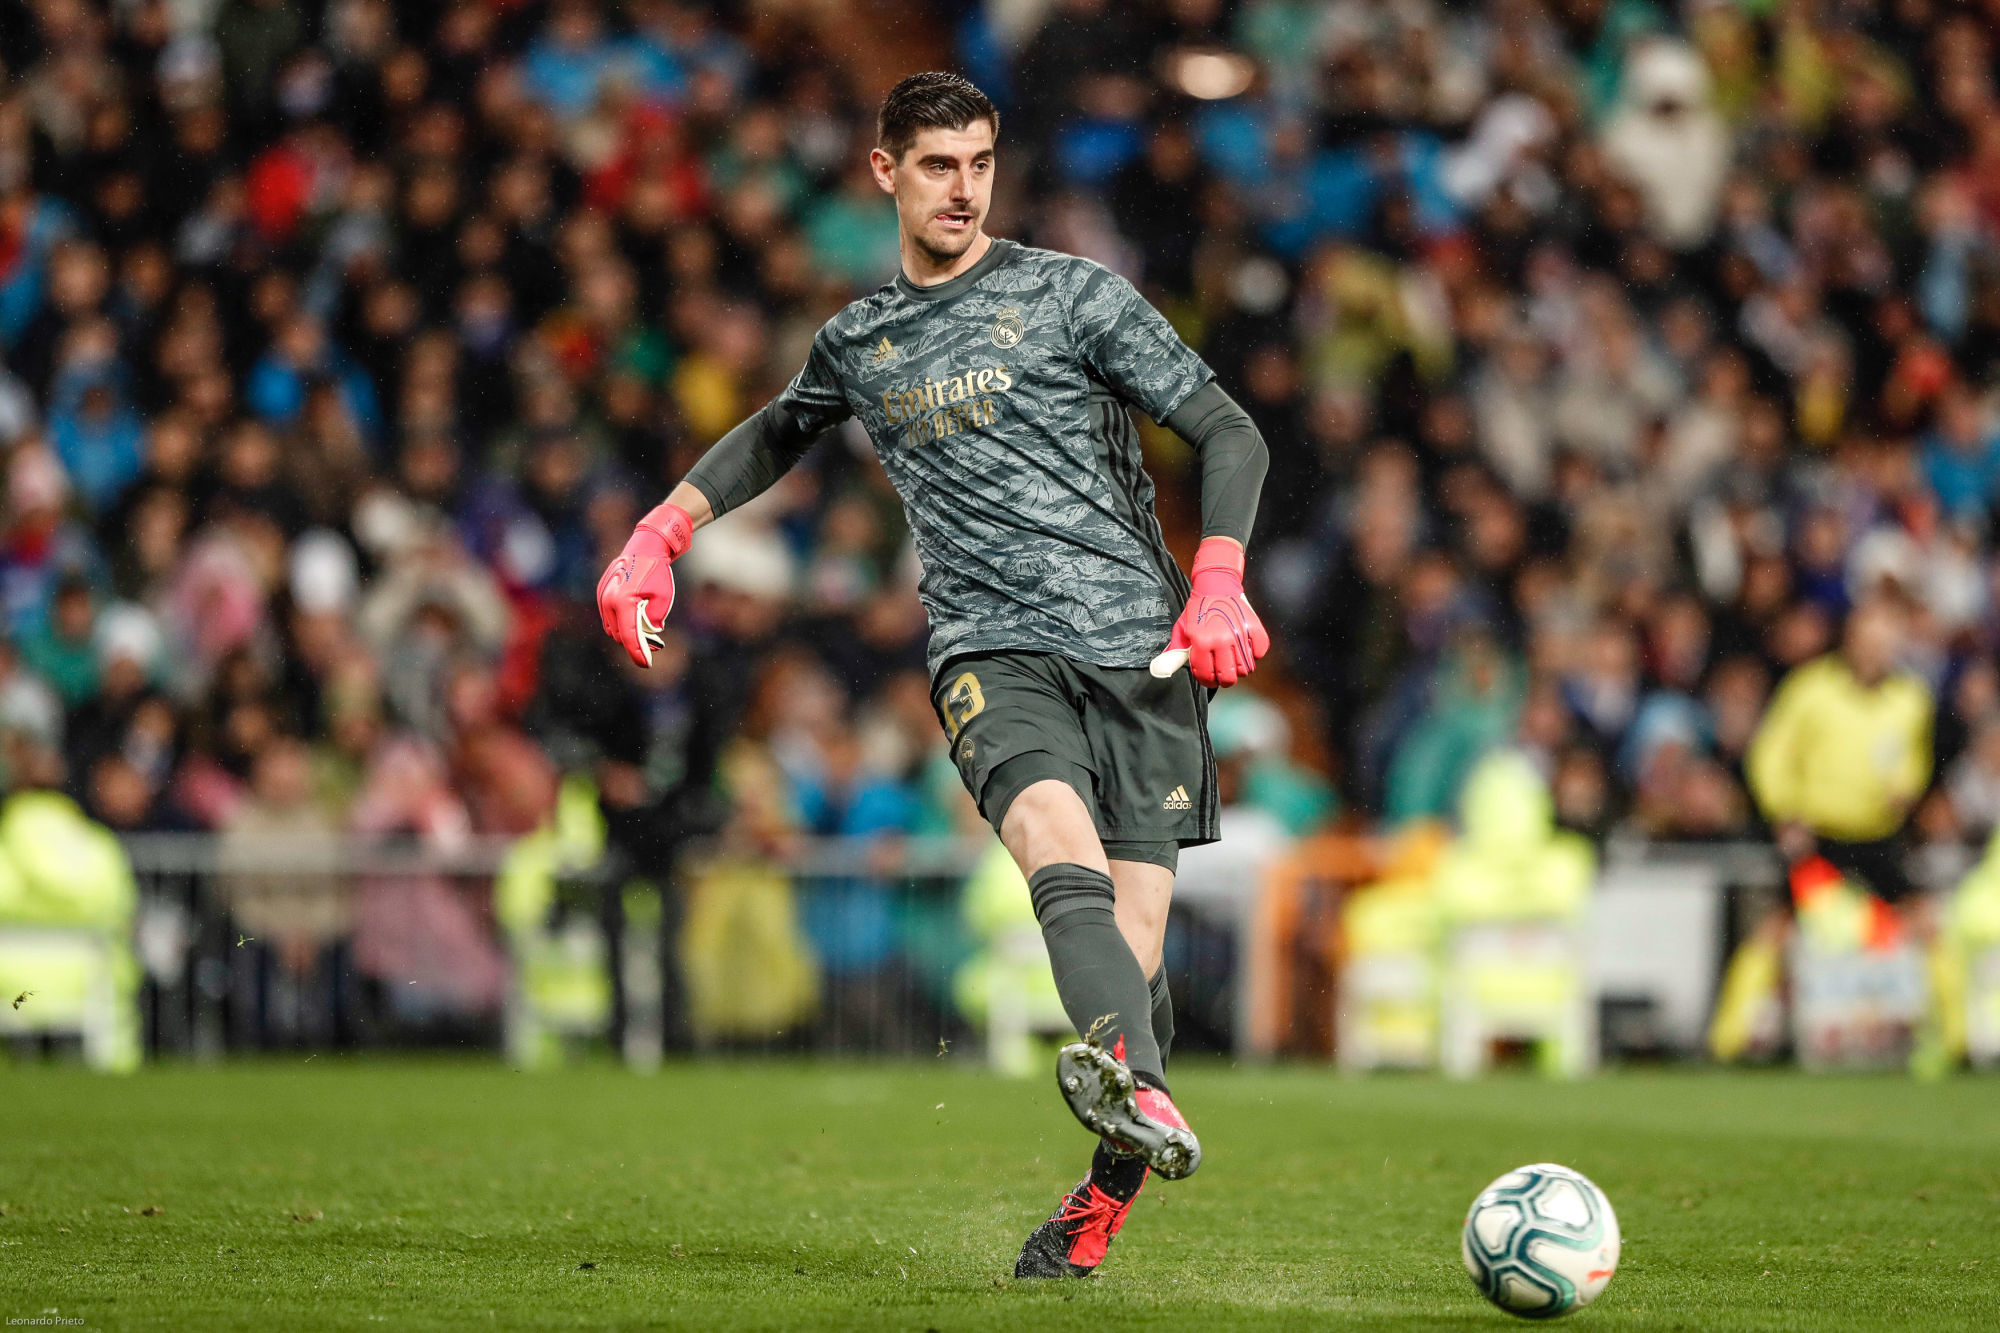 Thibaut Courtois (Real Madrid)
Photo by Icon Sport